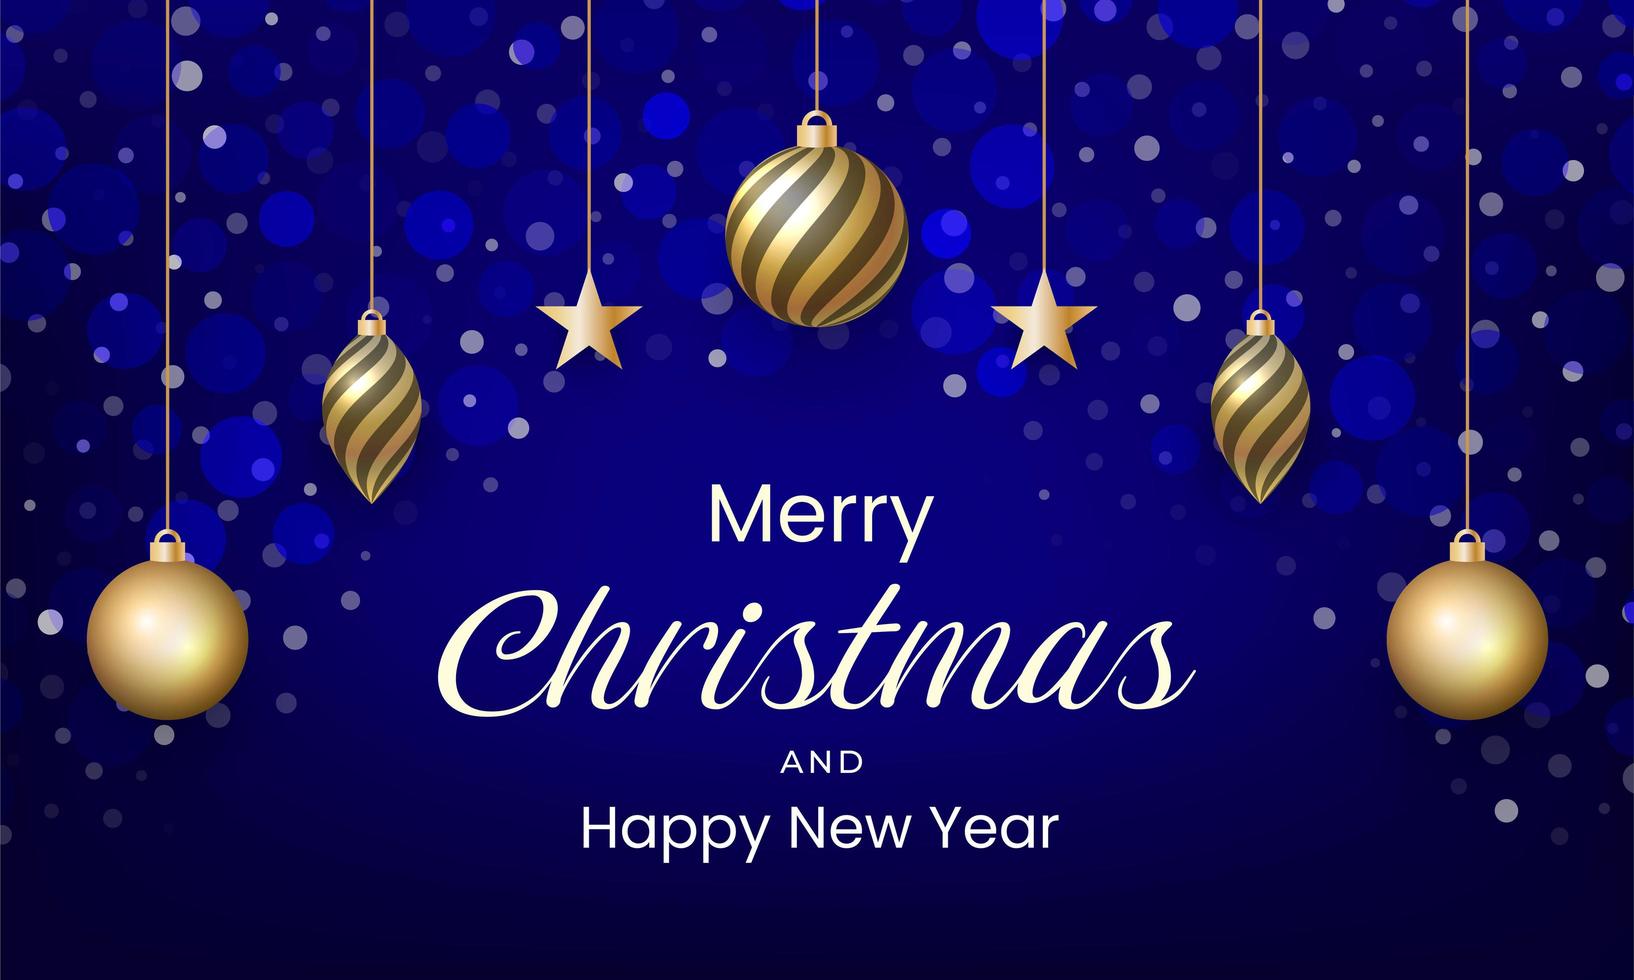 Merry Christmas and New Year design with blue color and snow effect vector